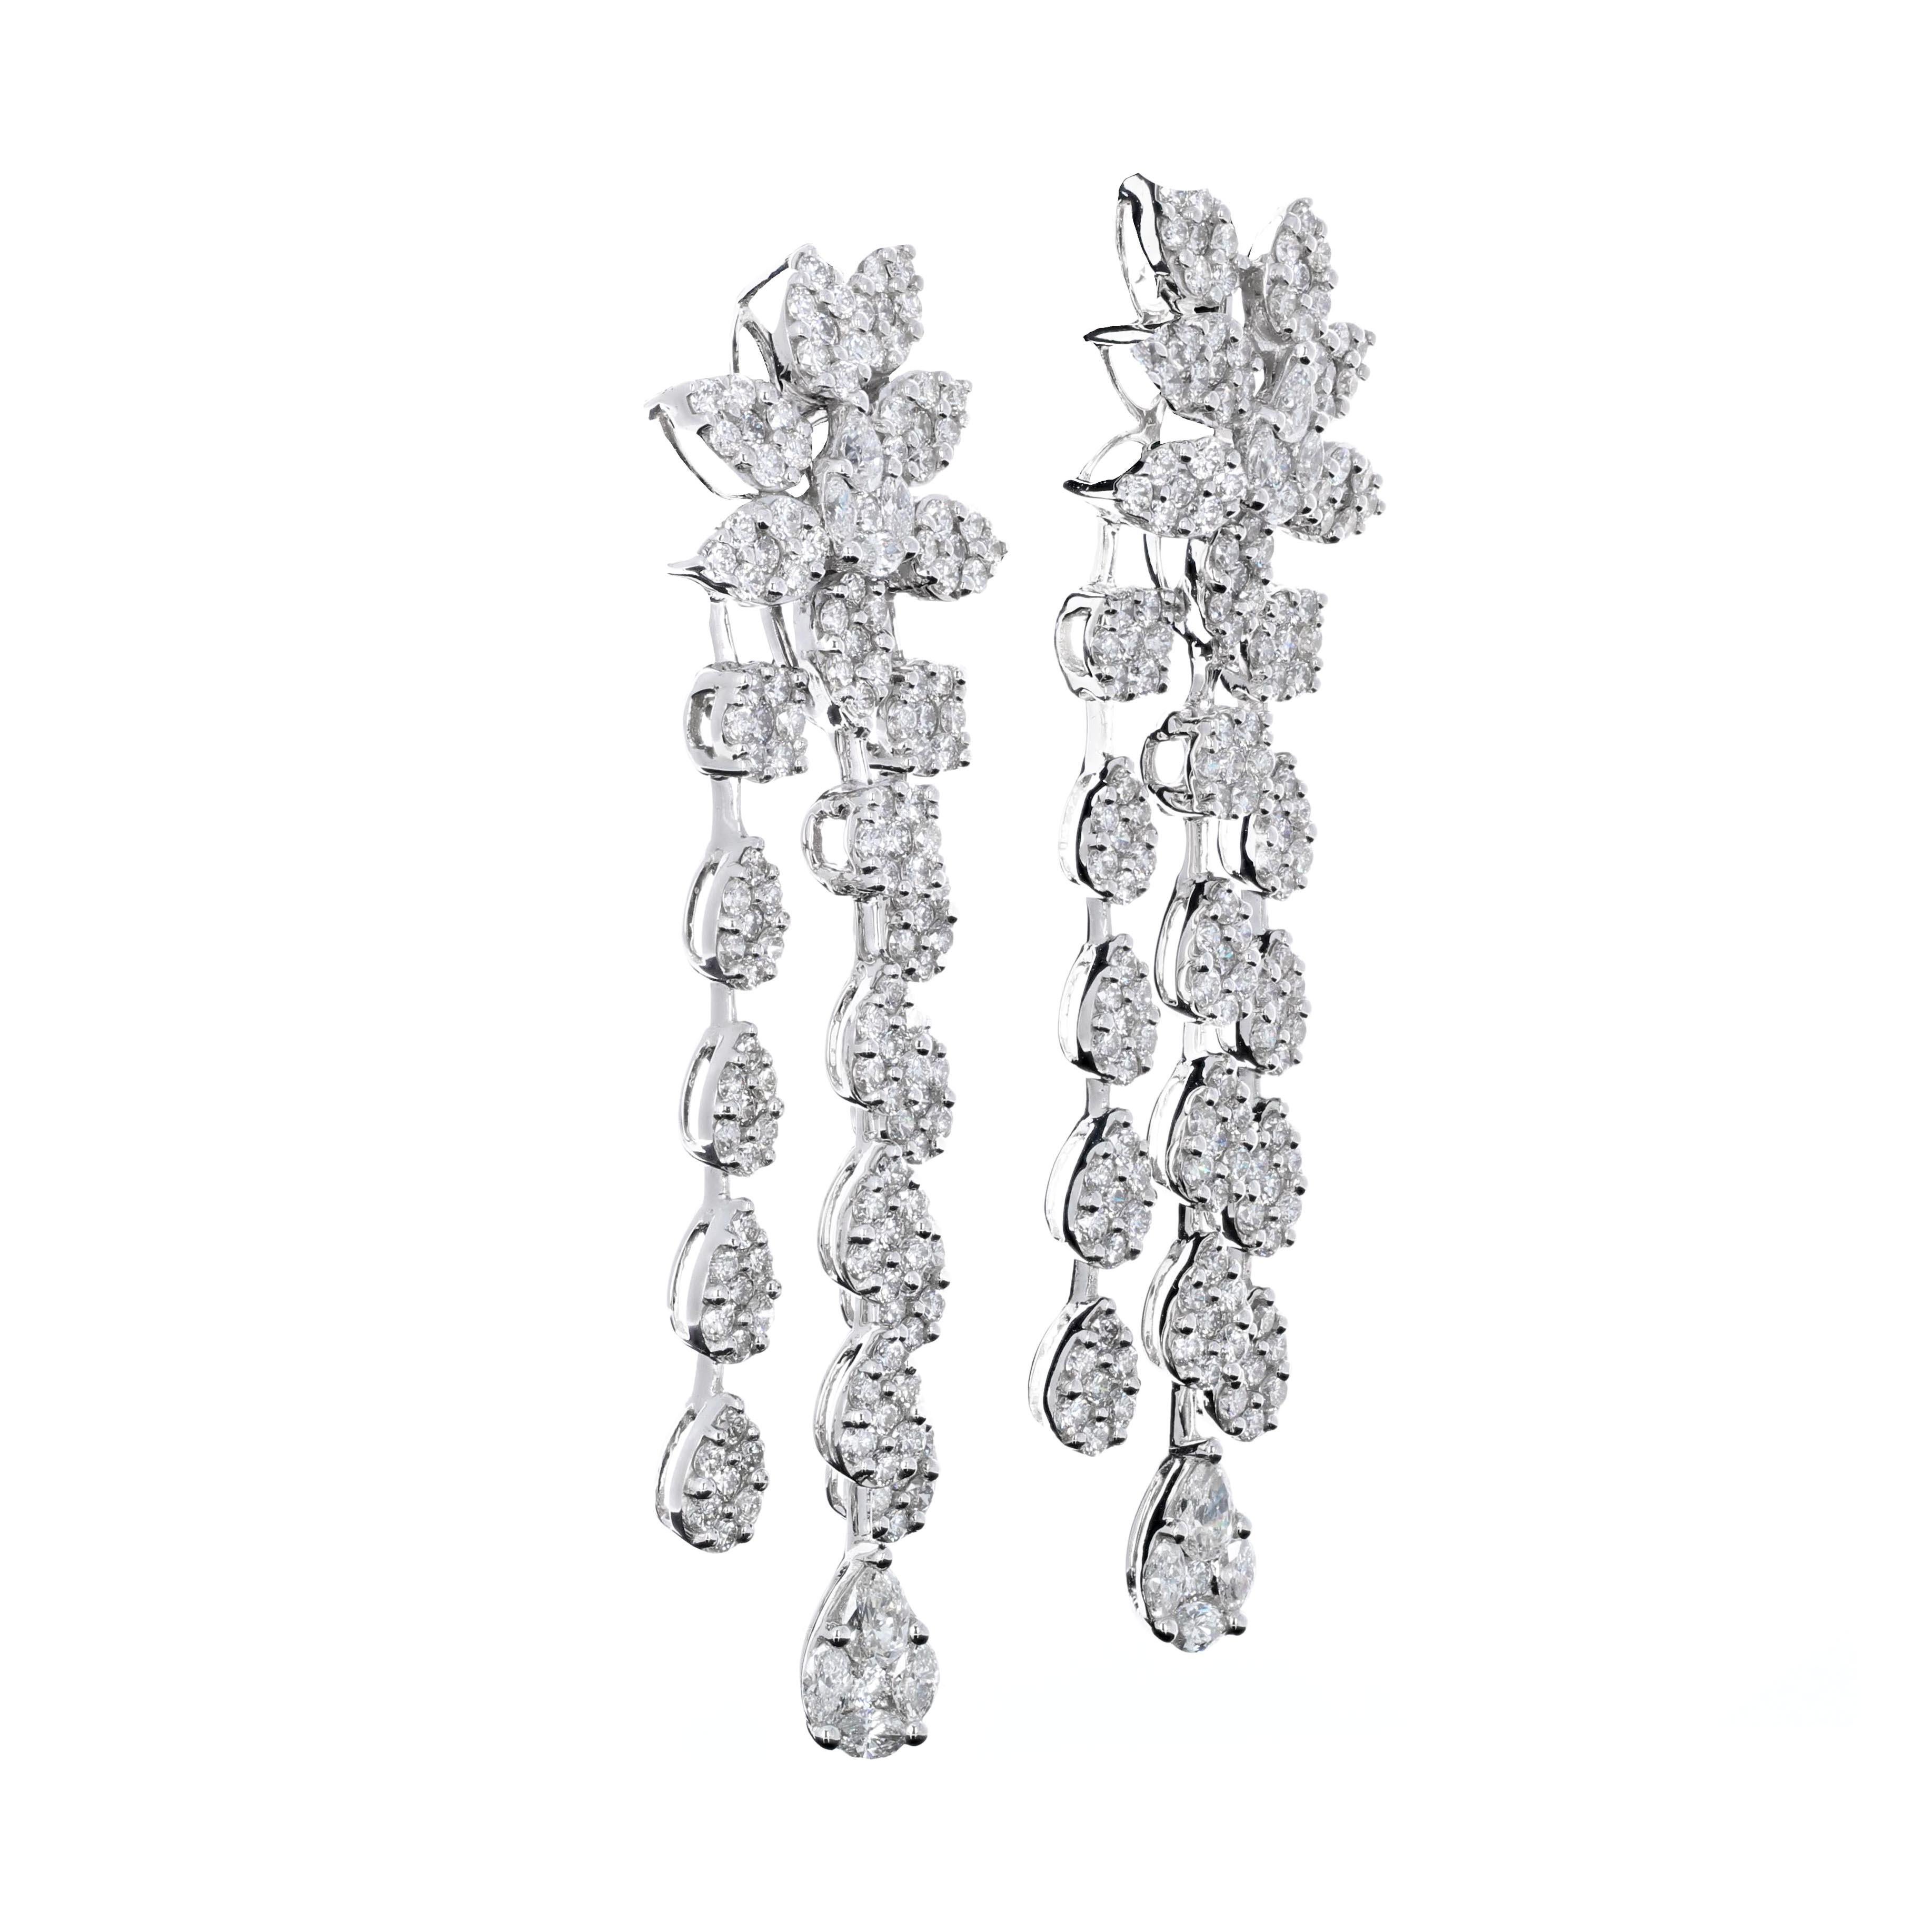 Hand made 18 karat white gold dangling chandelier diamond earrings. These earrings are what is refered to as an 